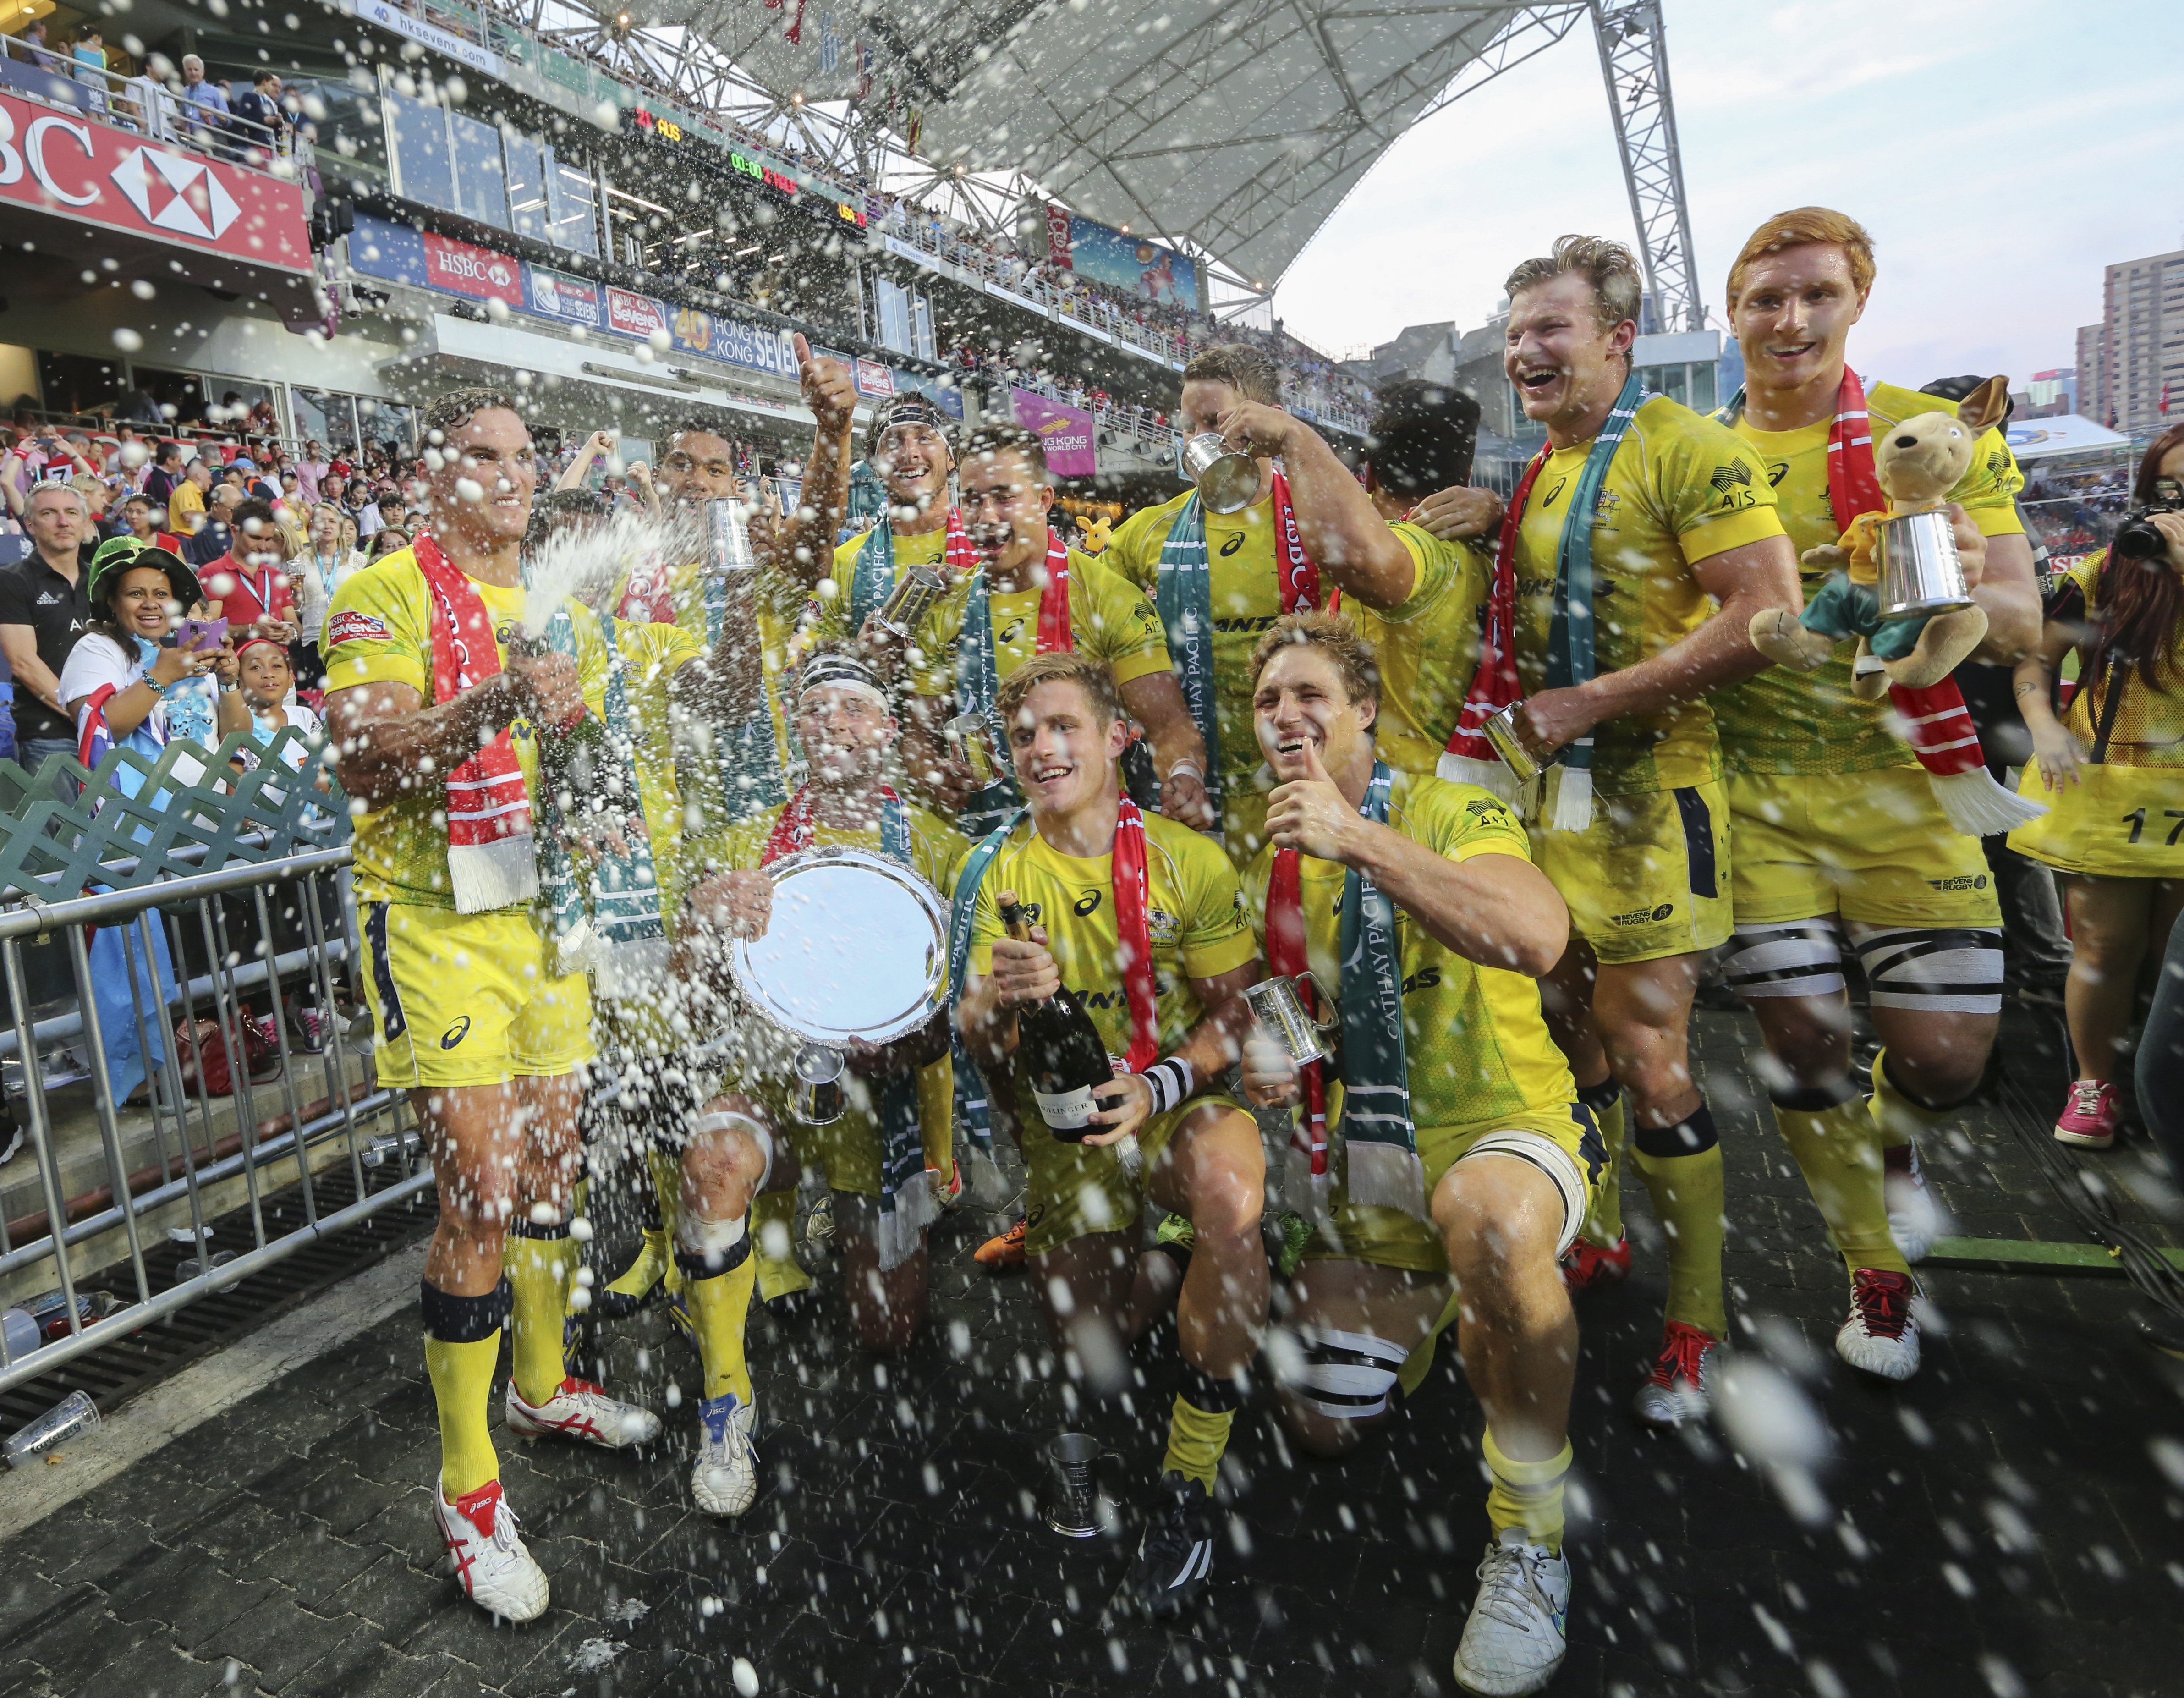 Australia celebrate winning the Plate final over United States 21-17 at the 2015 Hong Kong Sevens in March. Photo: Sam Tsang/SCMP